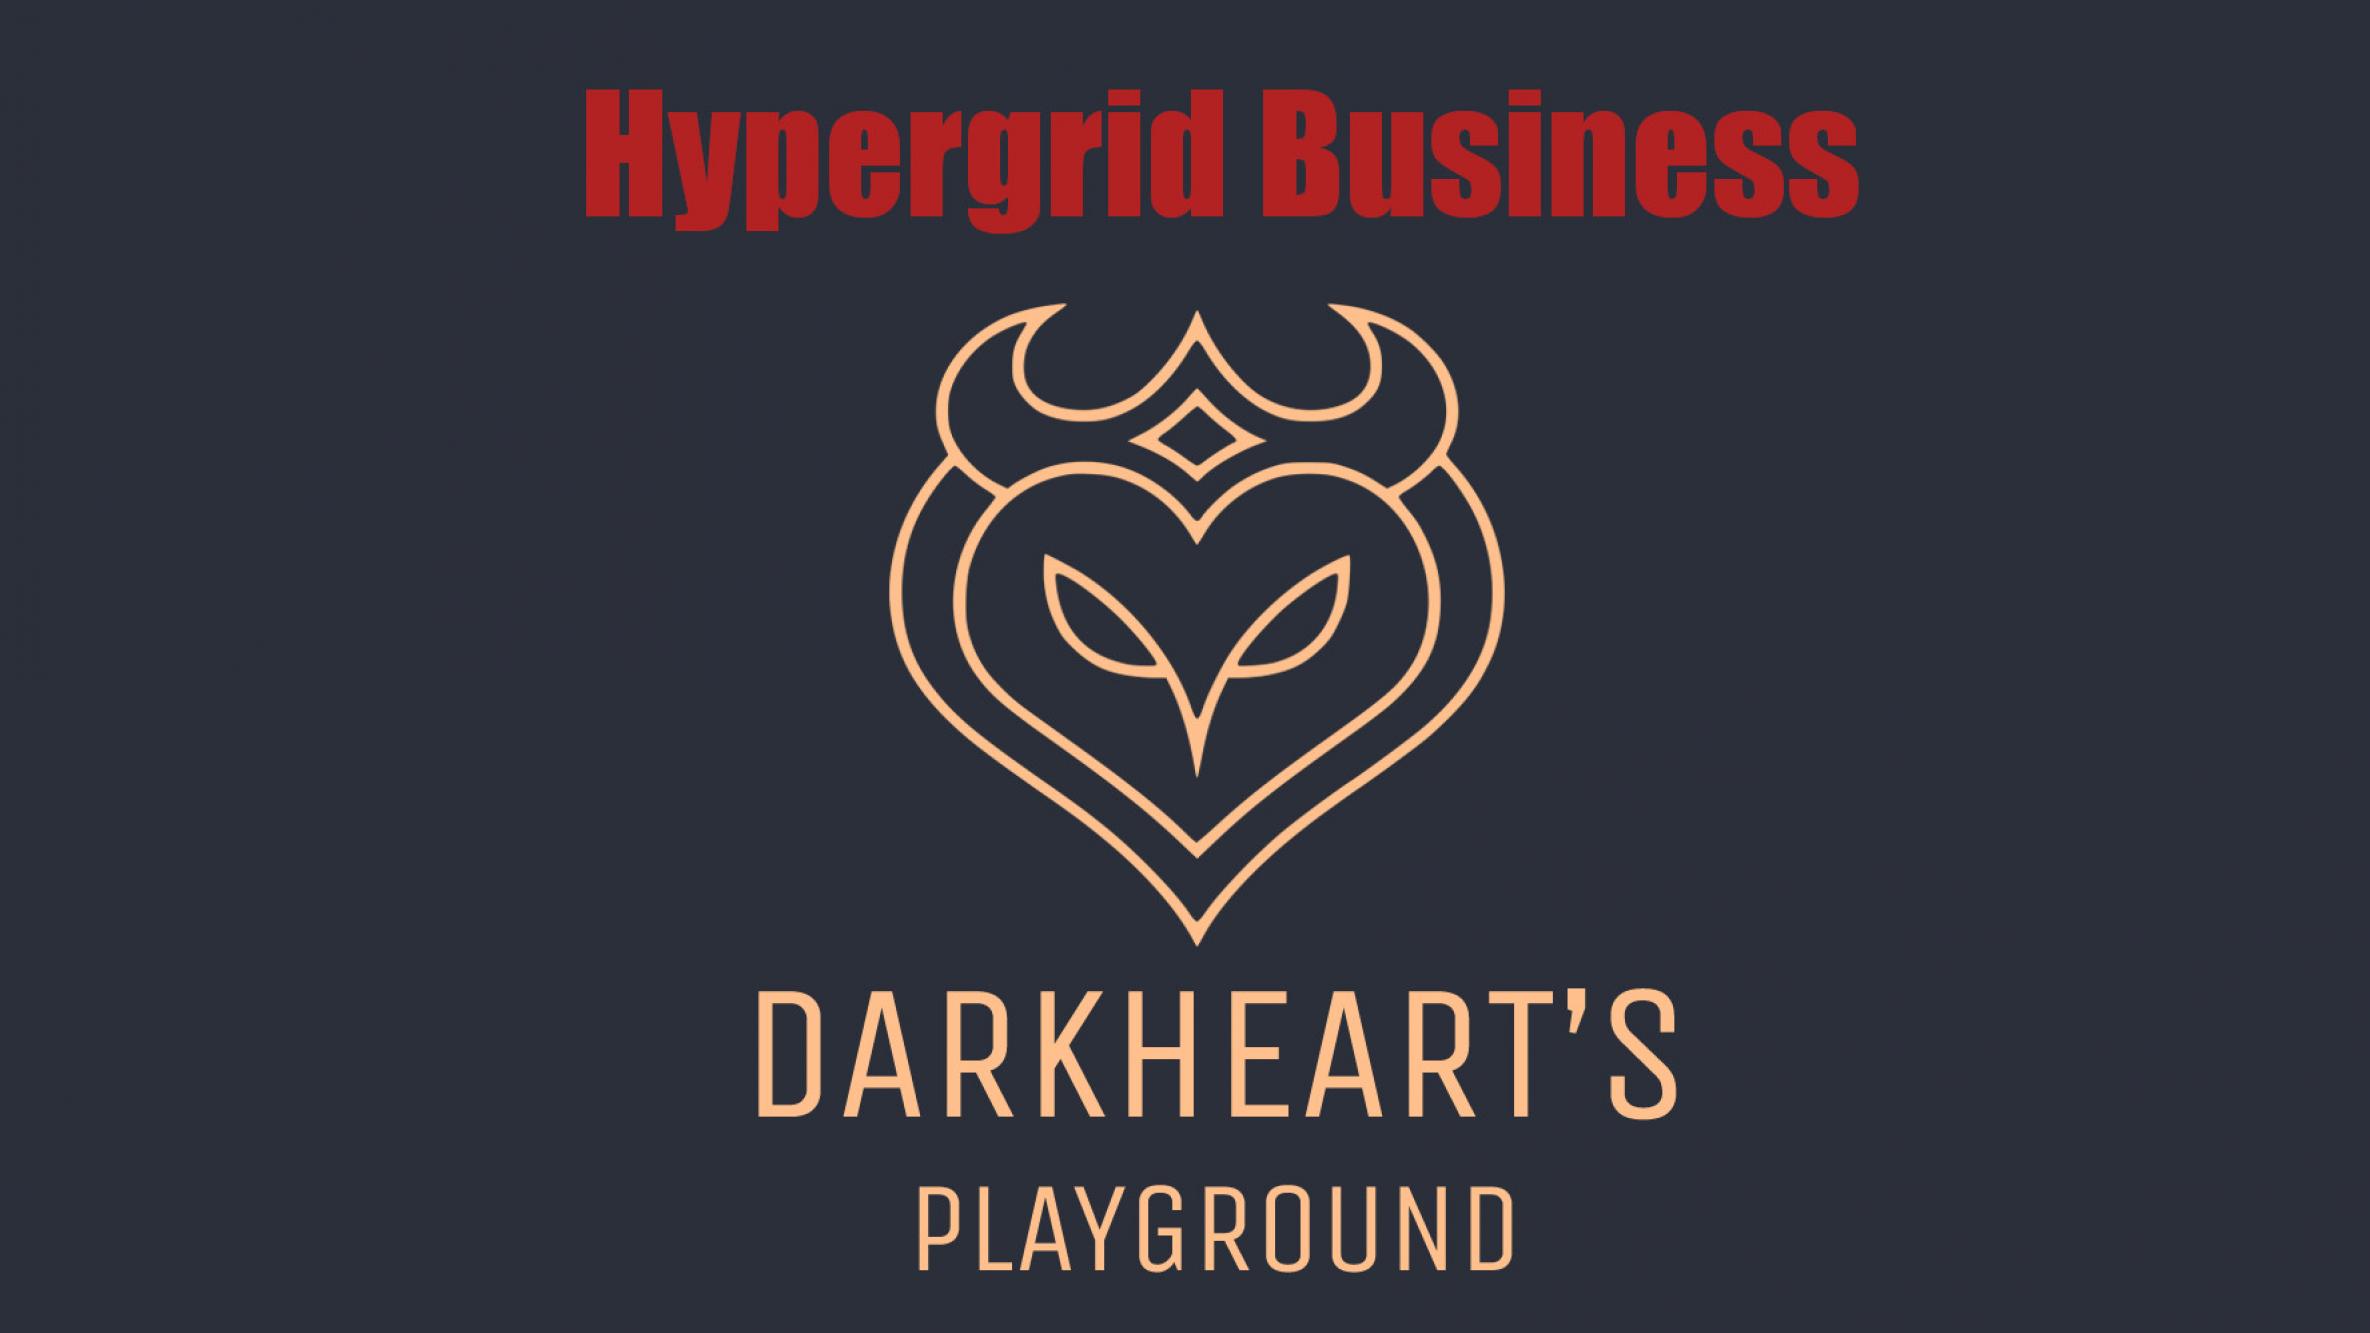 This Month's Ratings on Hypergrid Business